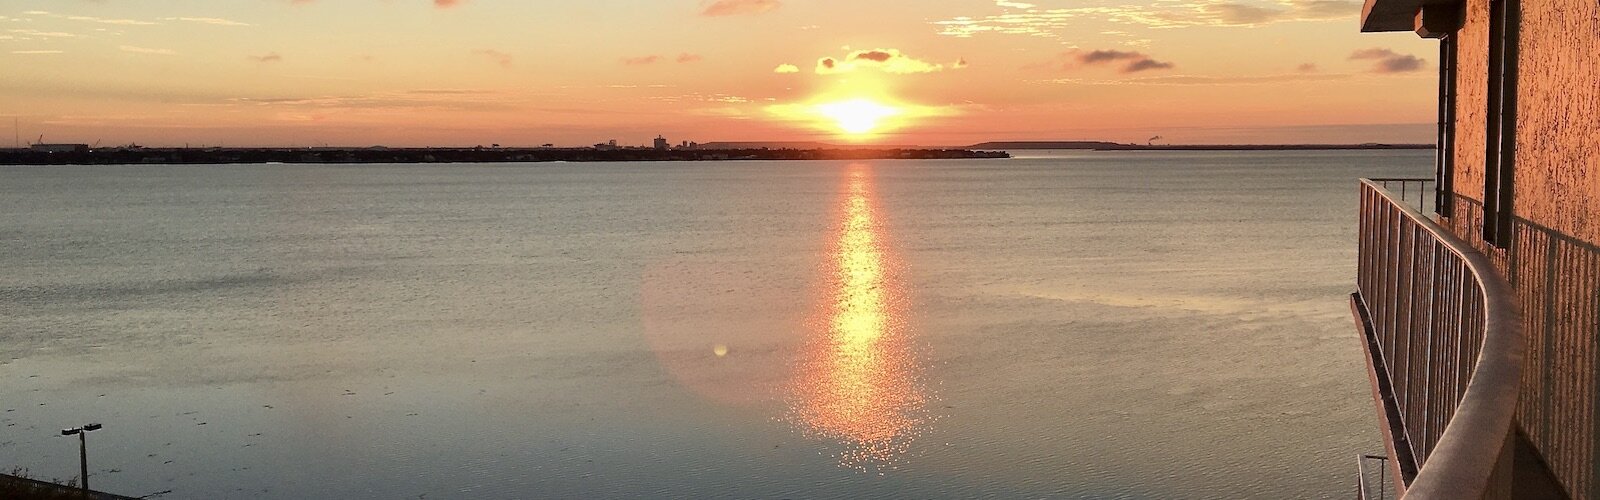 The sun rises on a new day over Davis Islands in Tampa.